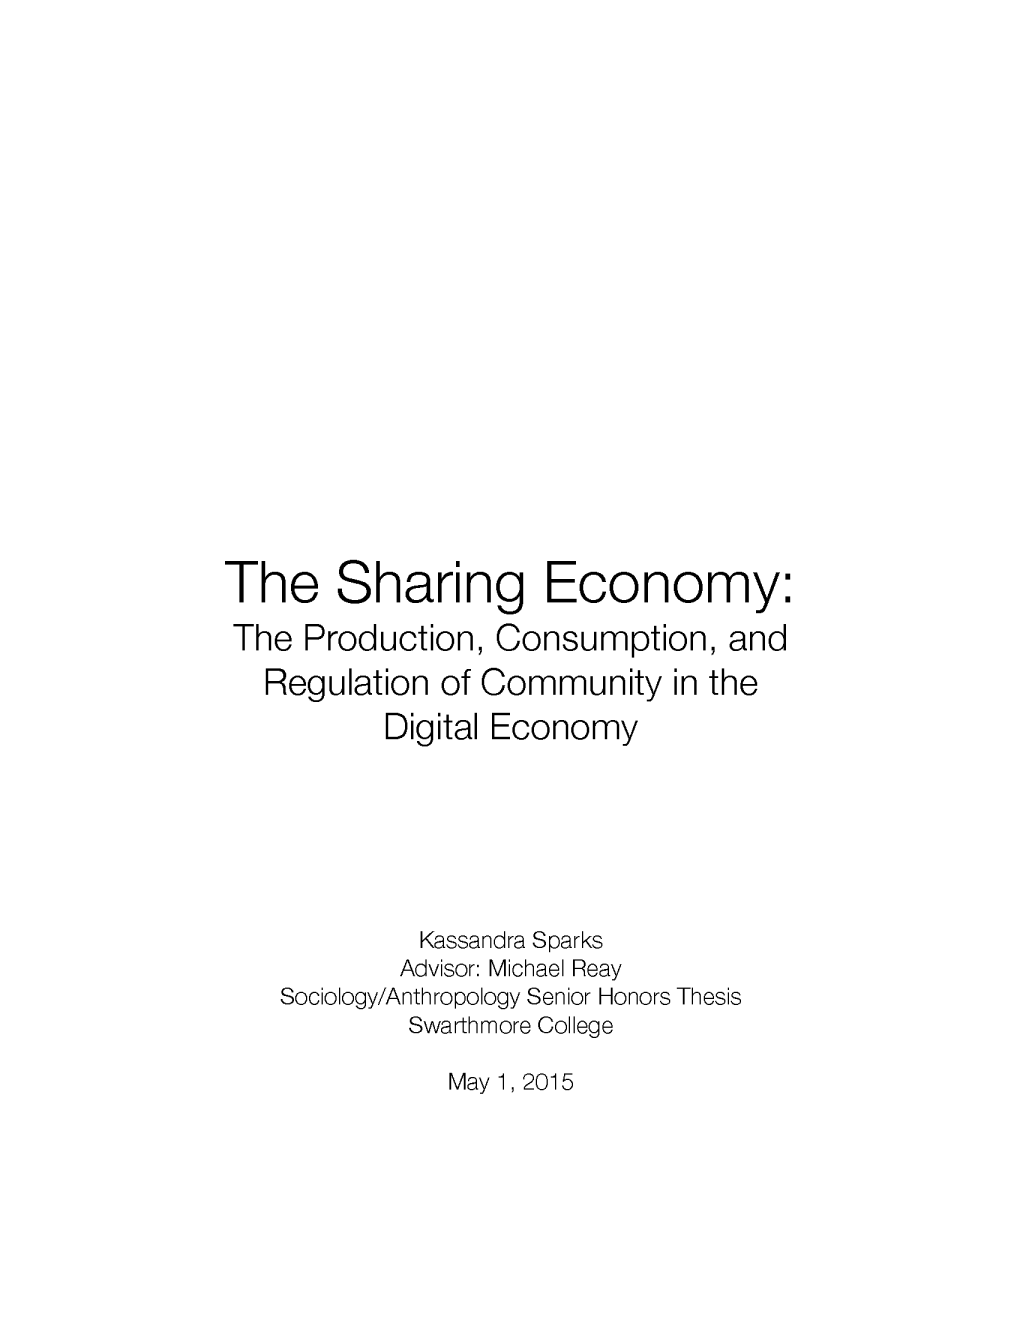 The Sharing Economy: the Production, Consumption, and Regulation of Community in the Digital Economy